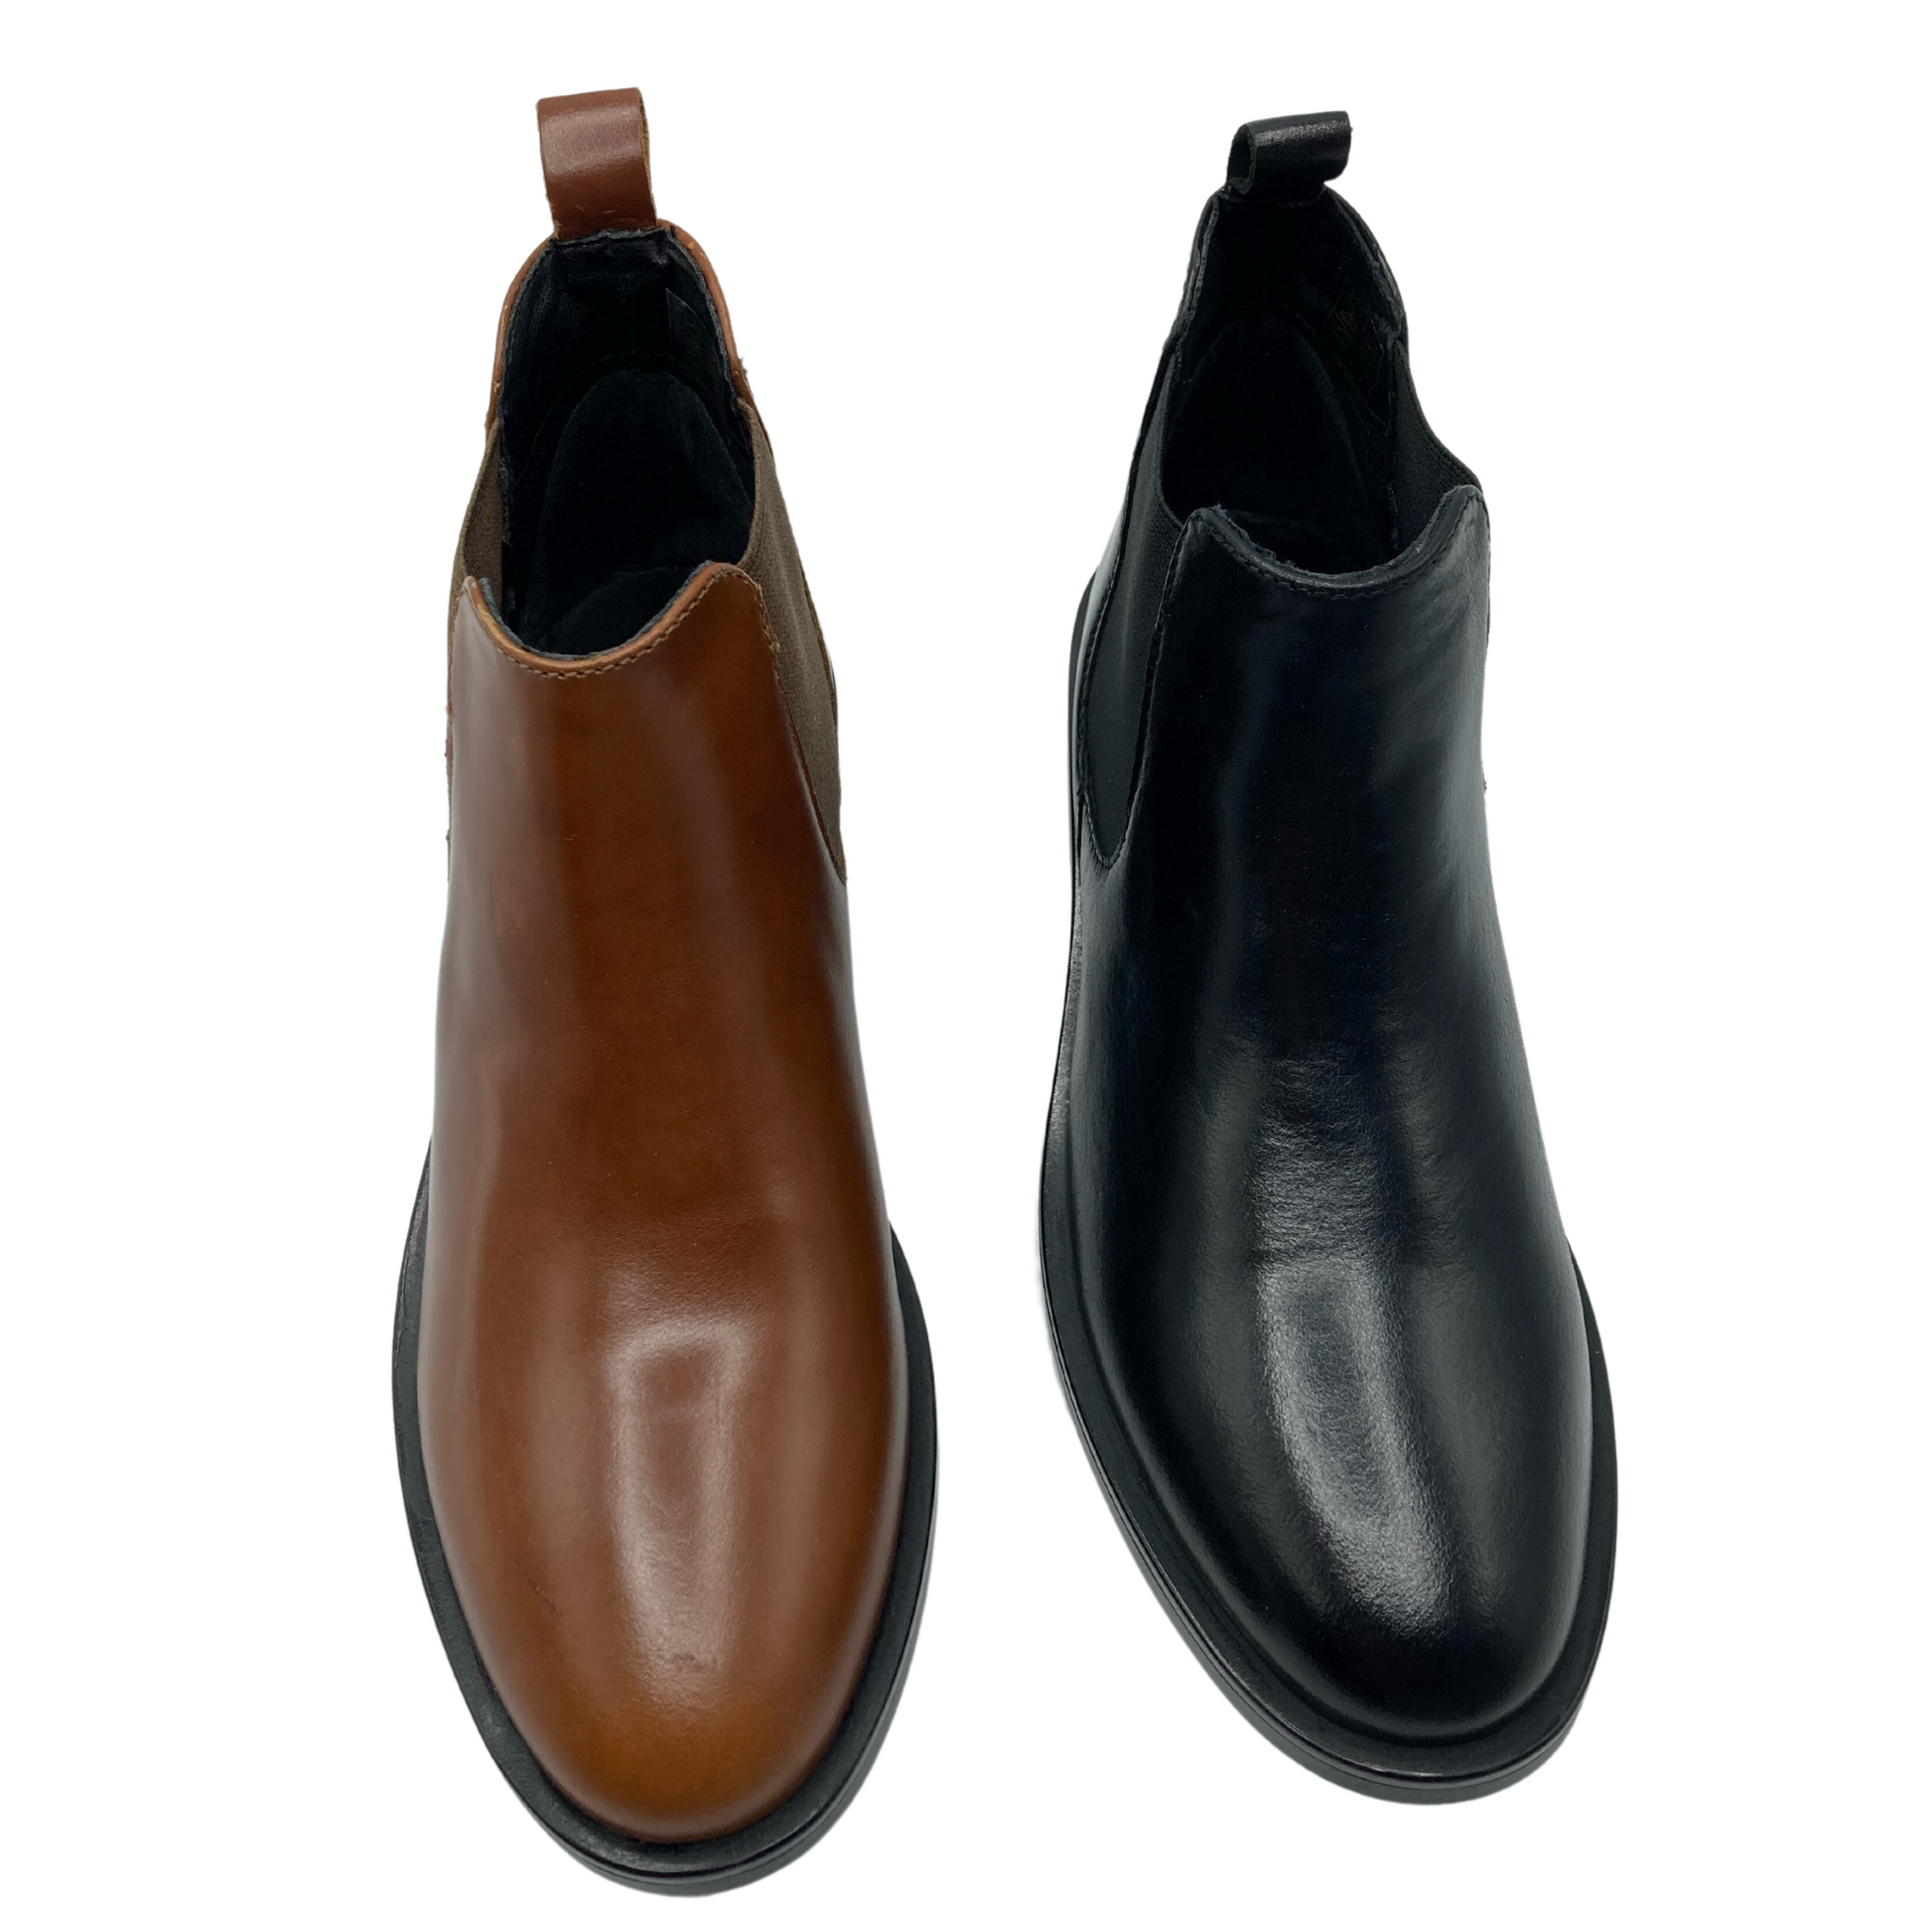 Top view of a pair of leather chelsea boots, the one on the left is tan and the one on the right is black. Both have black outsoles and elastic side gores